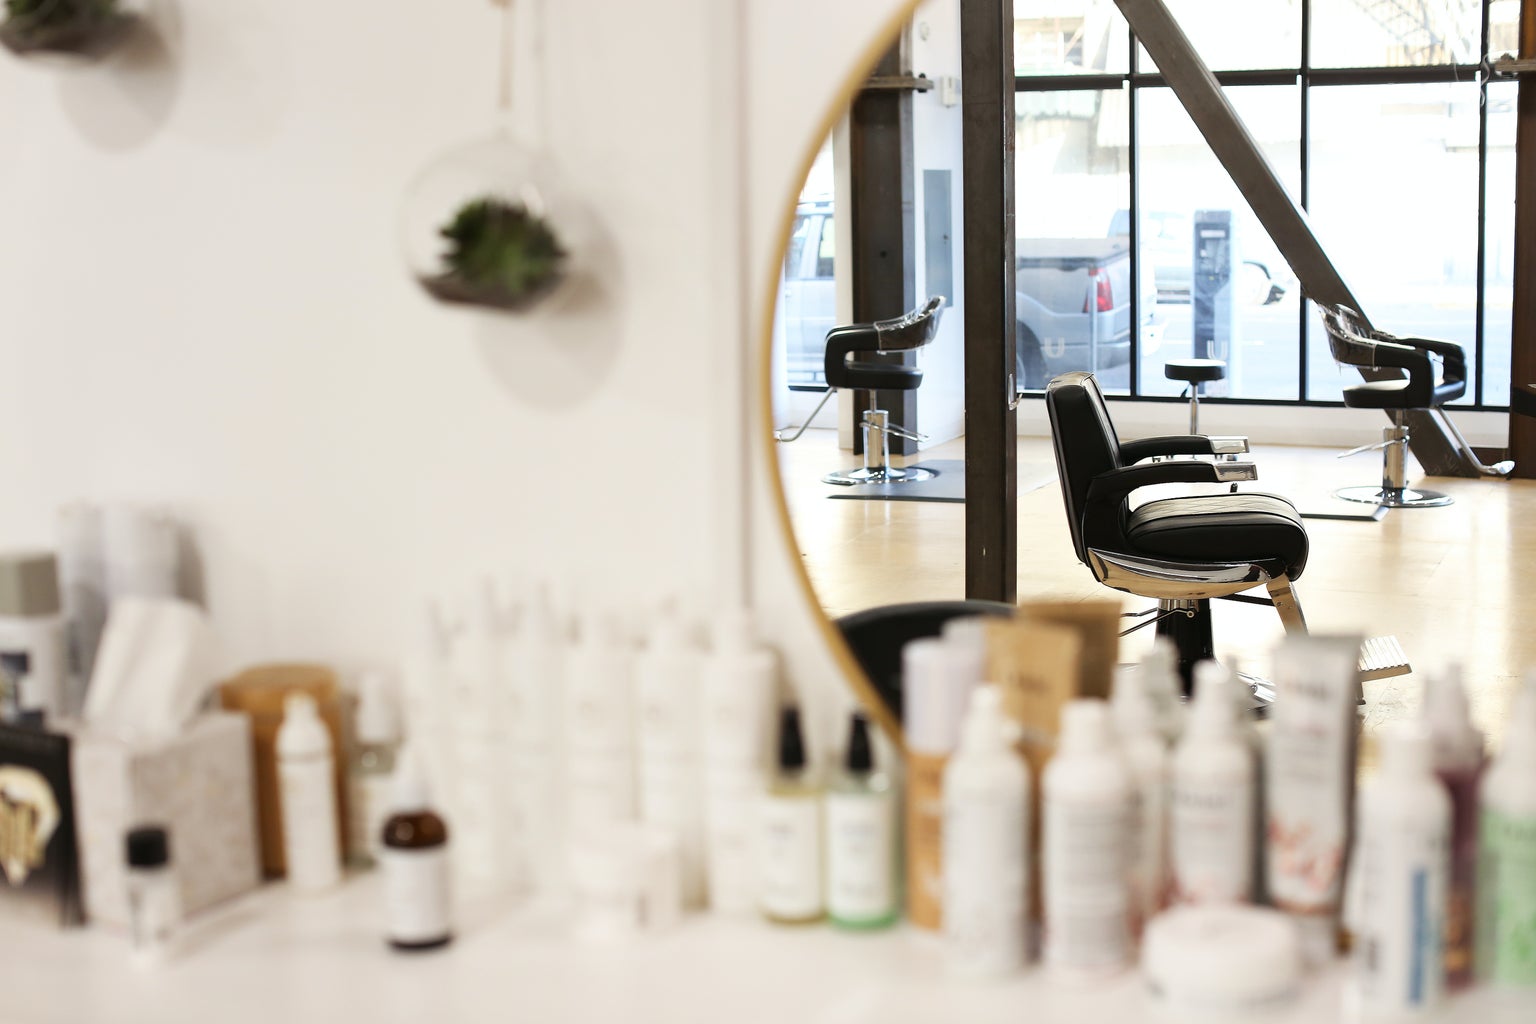 Hair salon in a mirror with hair products on the counter